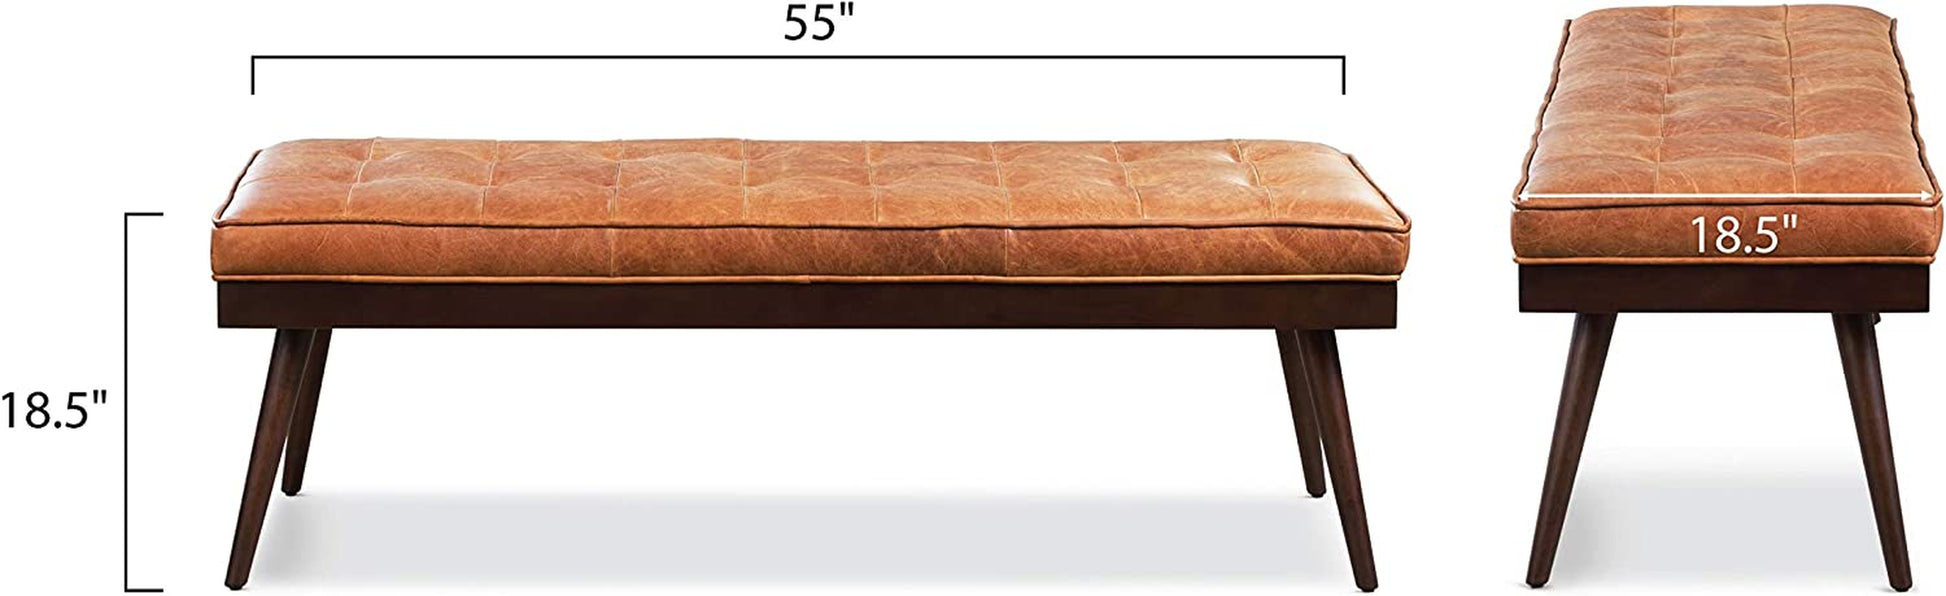 Luca Leather Bench, Tan